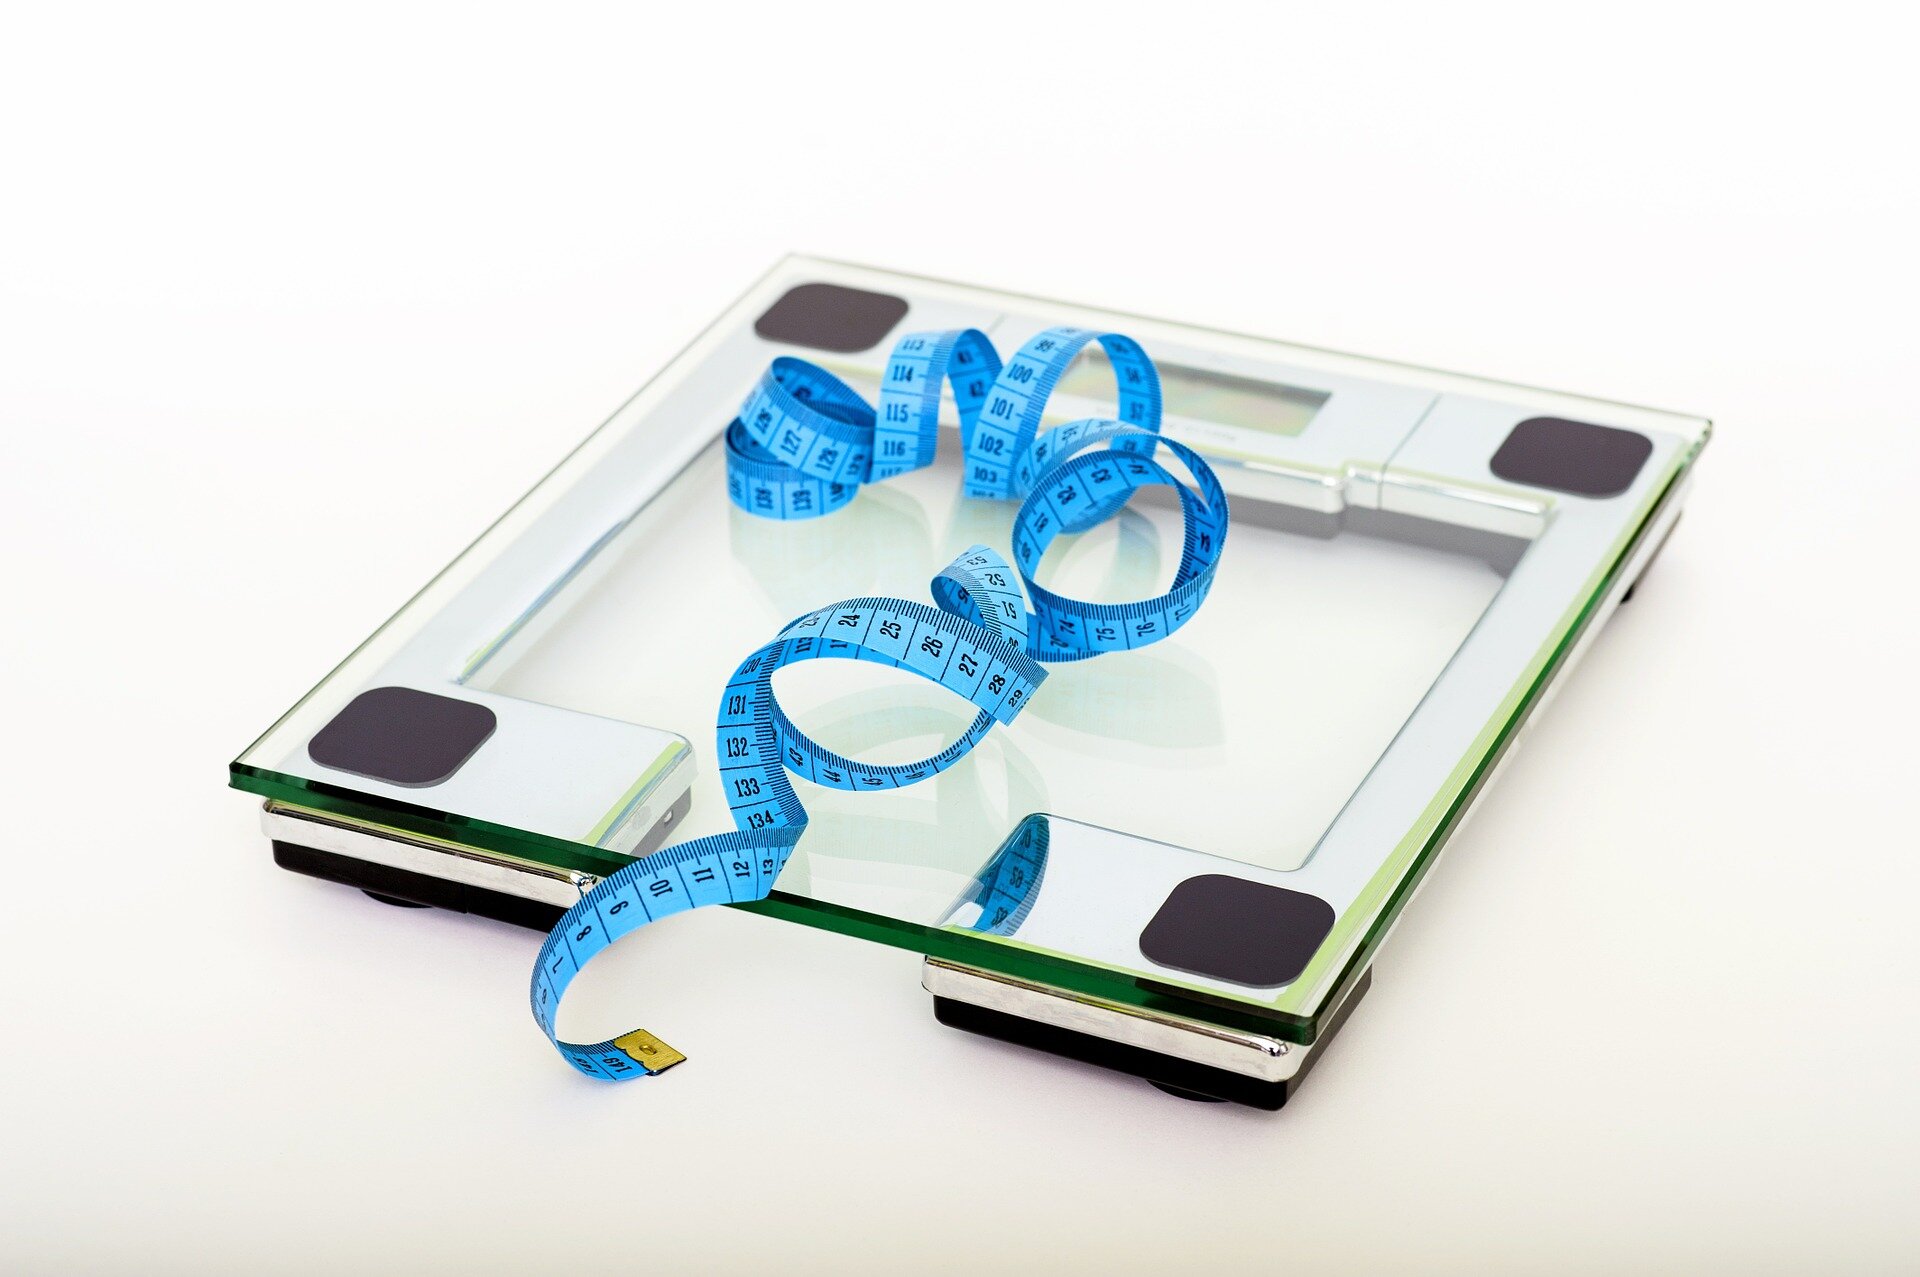 Virtual weight-loss support during lockdown leads to clinically meaningful weight loss